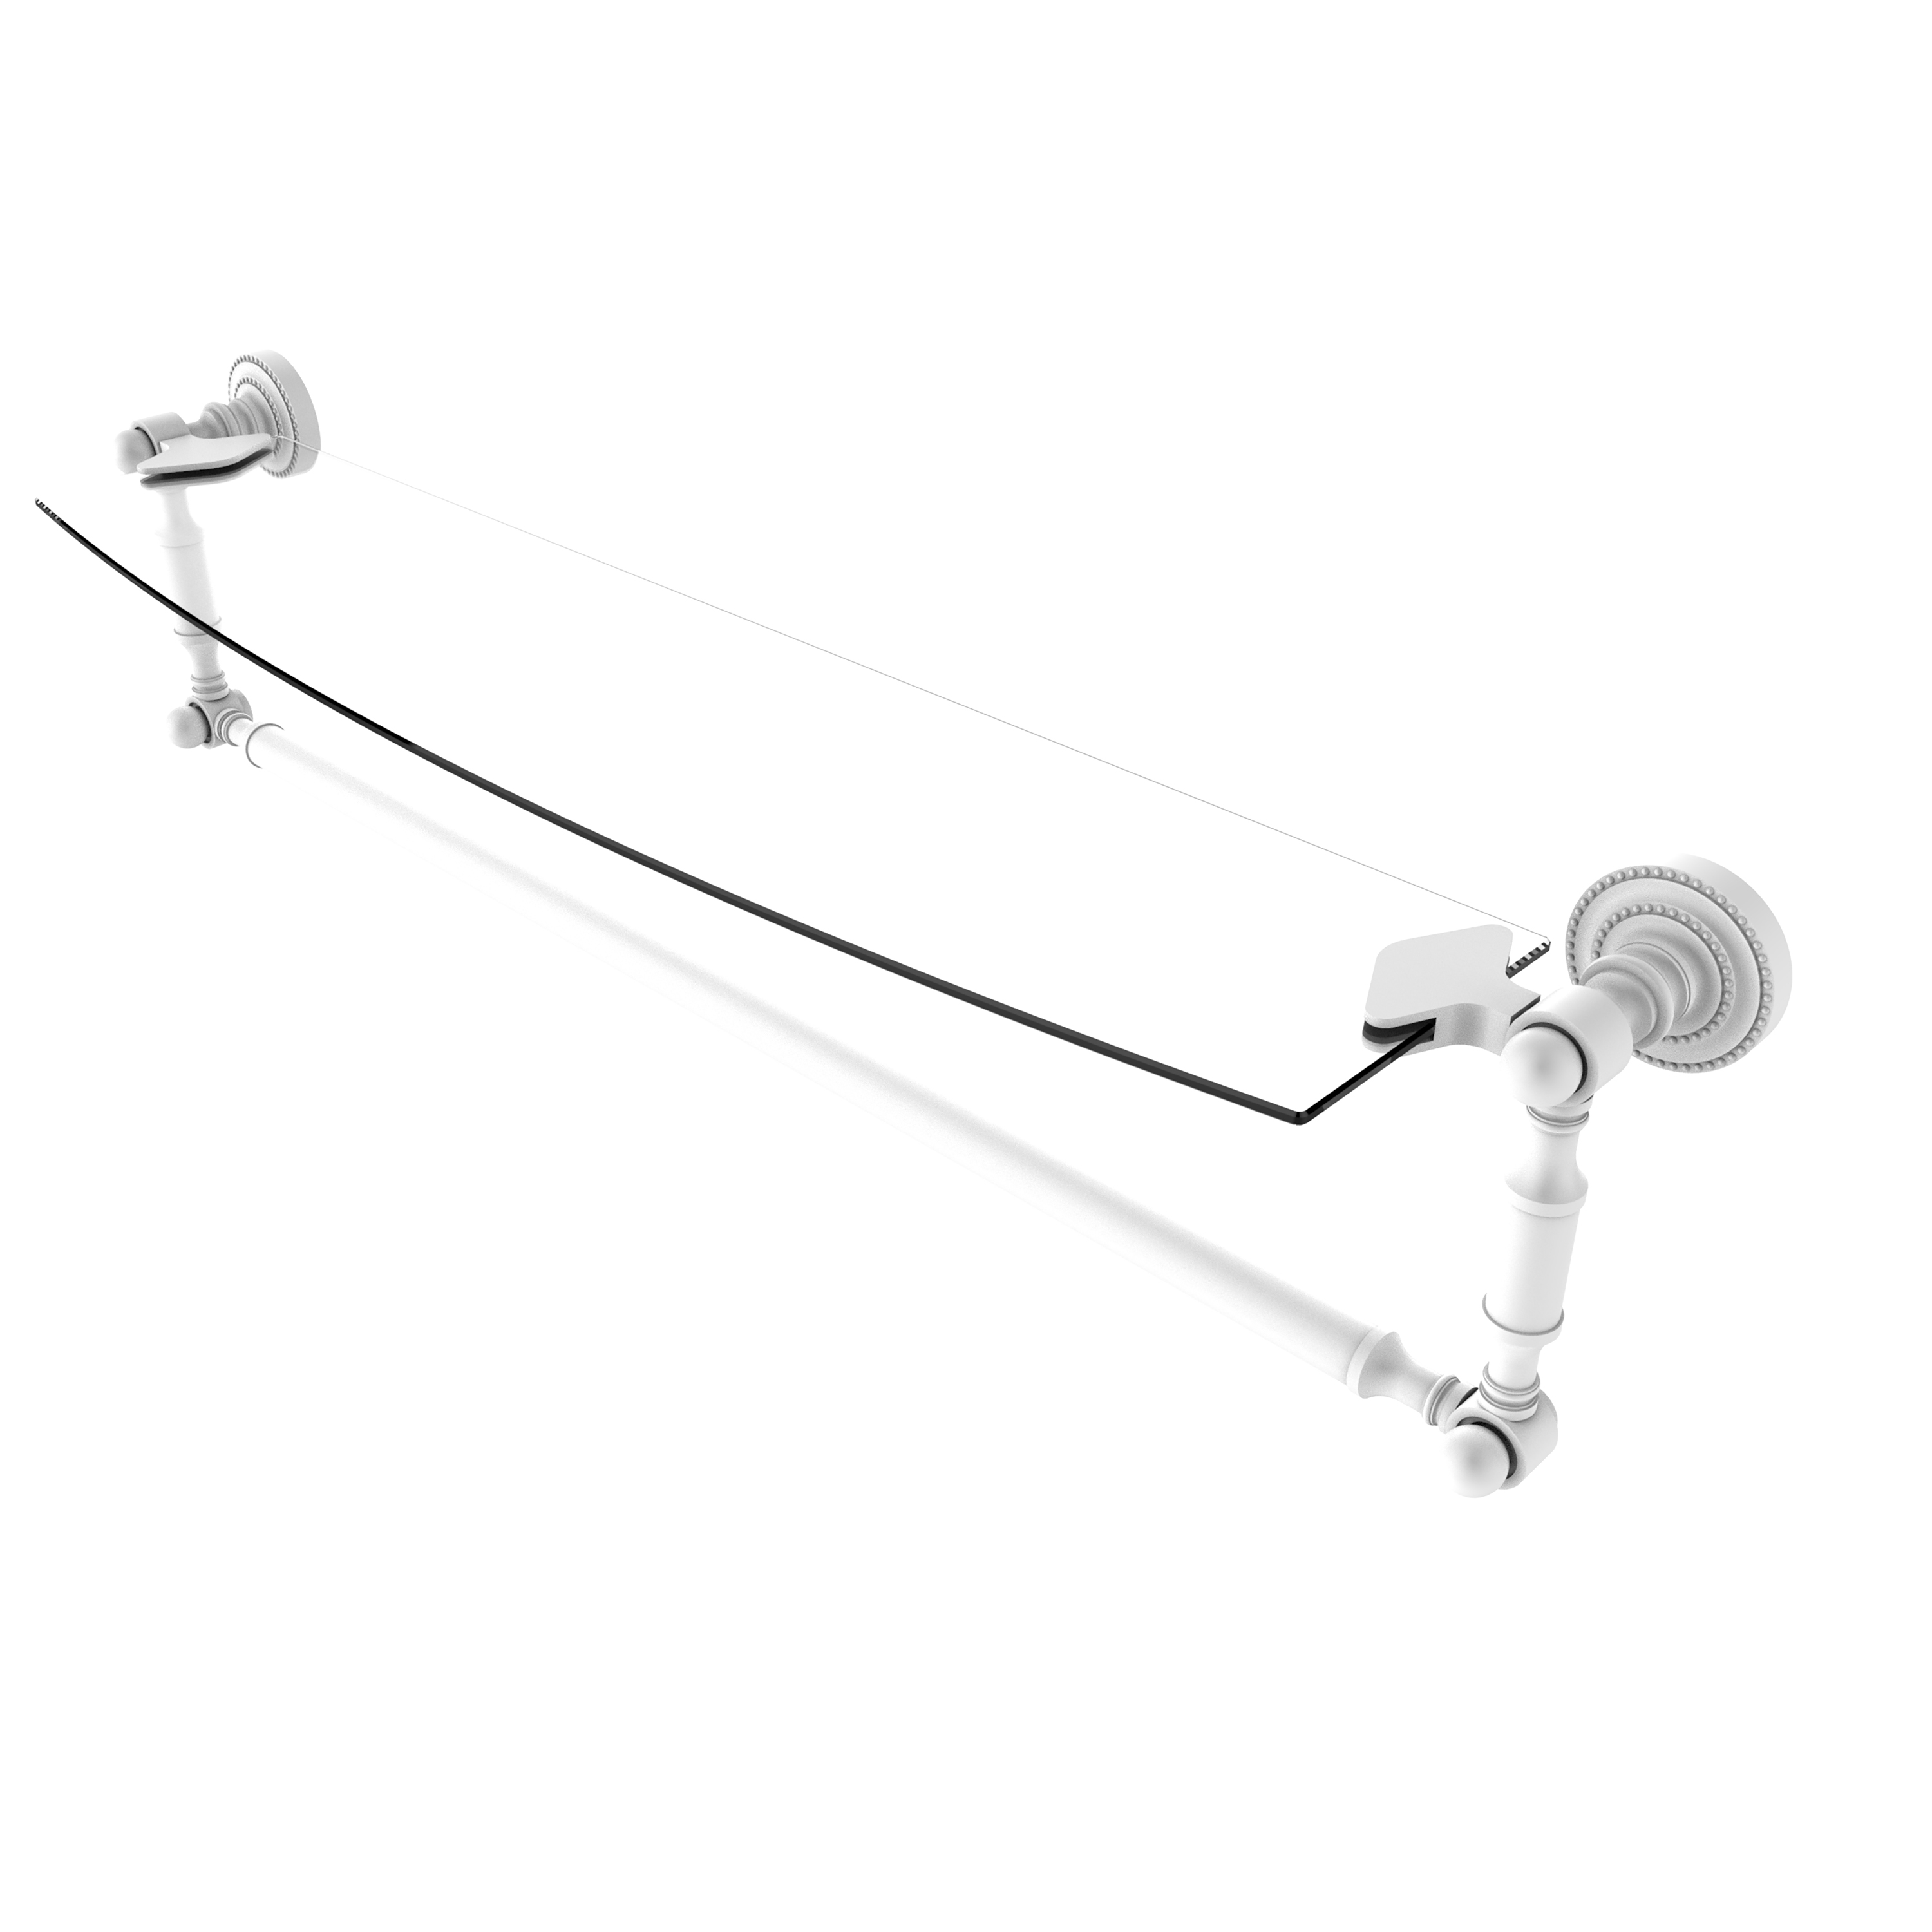 Allied Brass Dottingham 24'' Glass Vanity Shelf with Towel Bar in Matte White - image 1 of 1